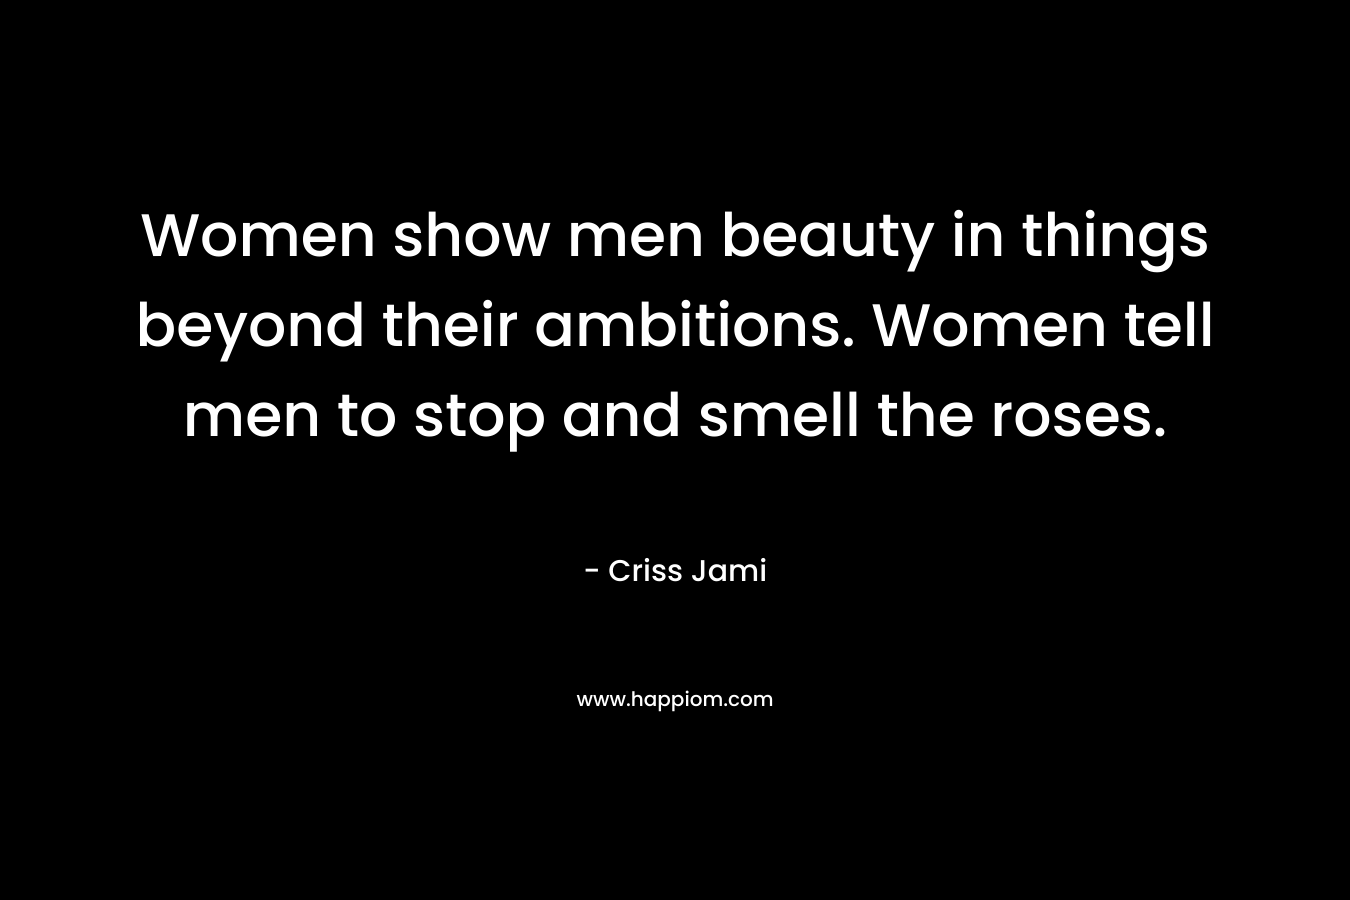 Women show men beauty in things beyond their ambitions. Women tell men to stop and smell the roses.